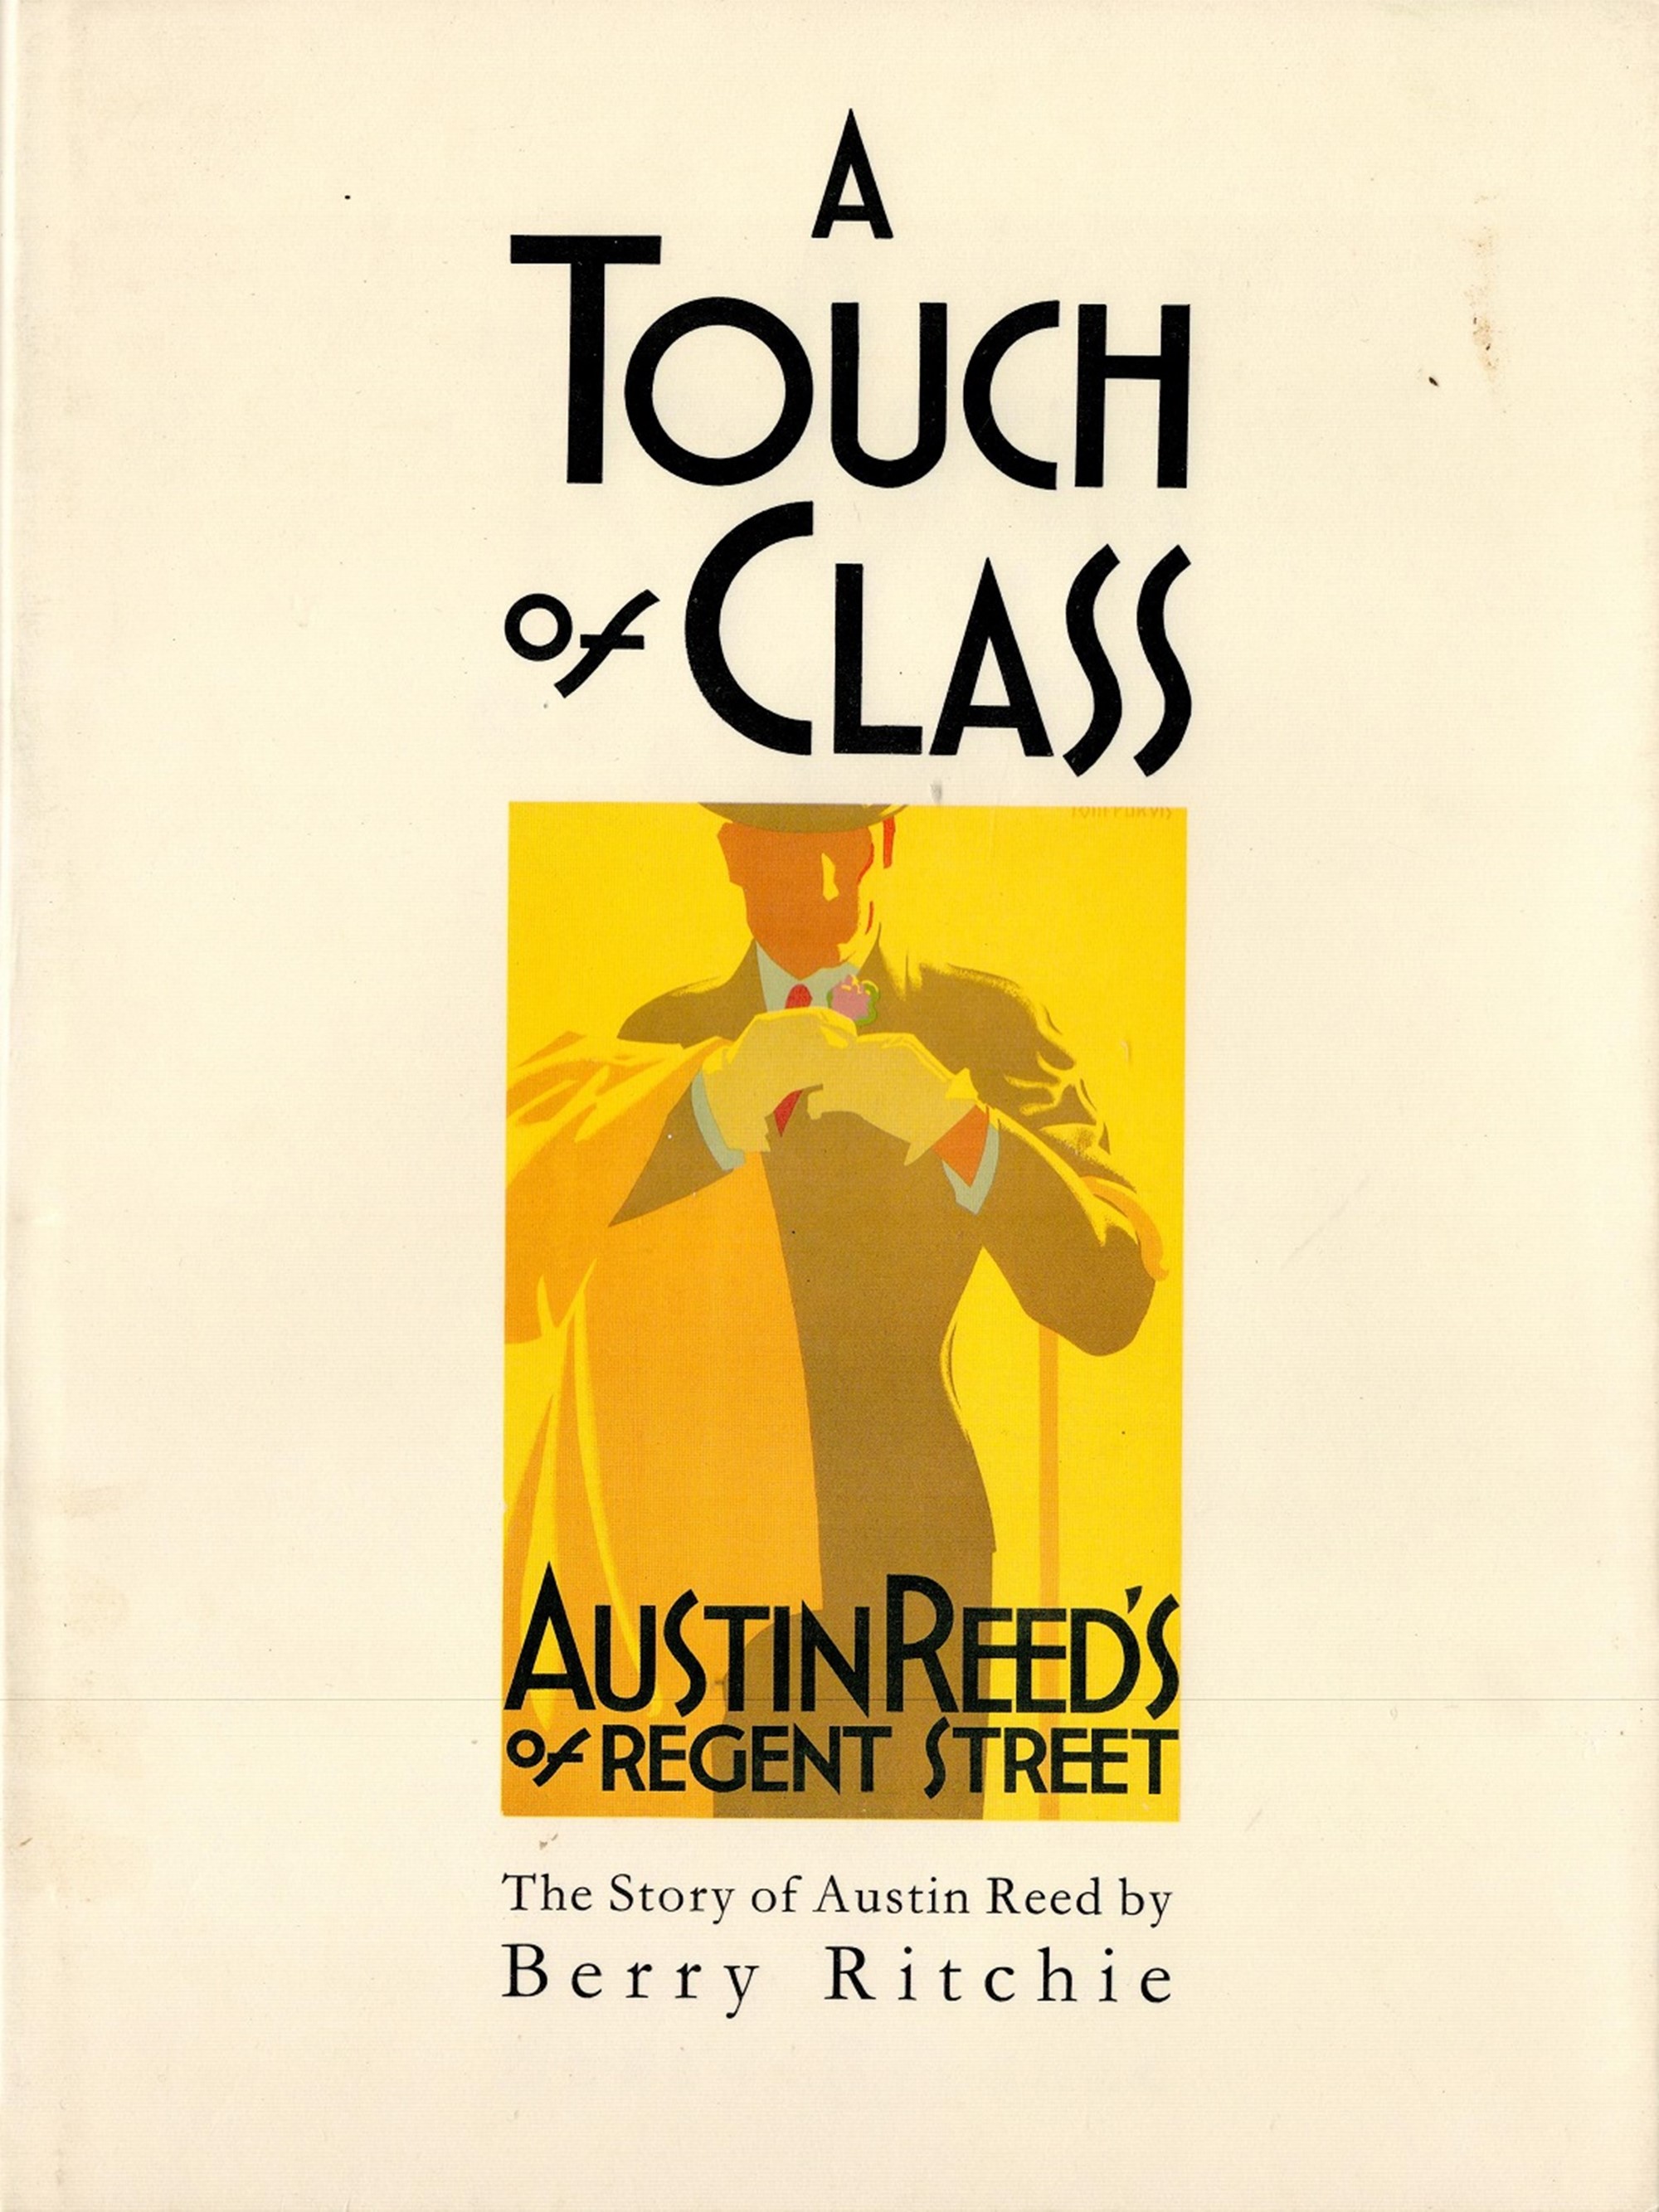 A Touch of Class Austin Reeds of Regent Street by Berry Ritchie Hardback Book 1990 First Edition